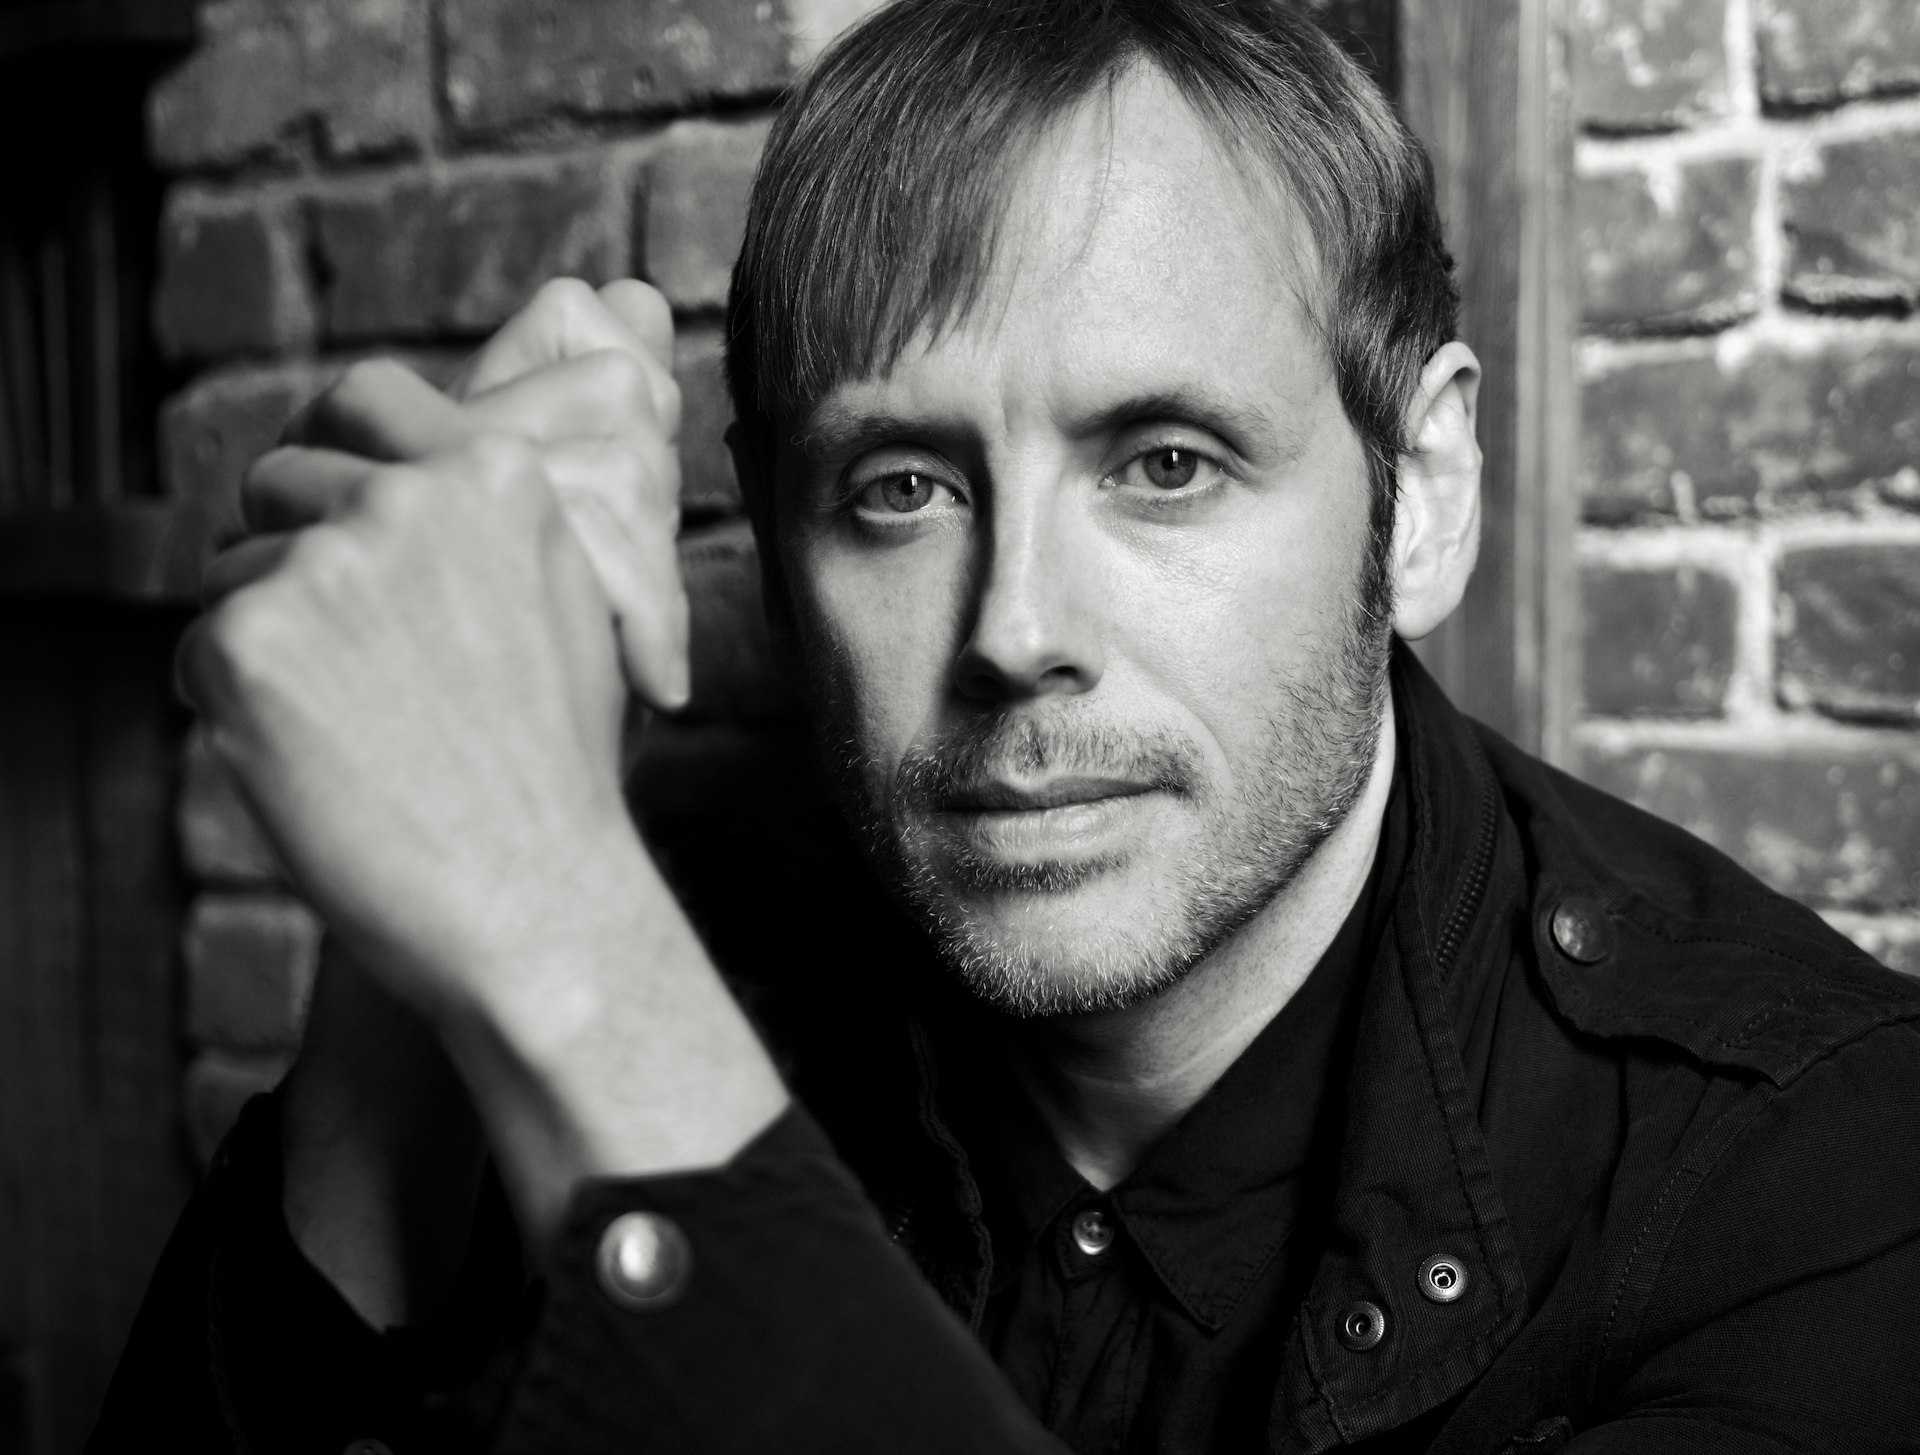 Geoff Rickly's second act